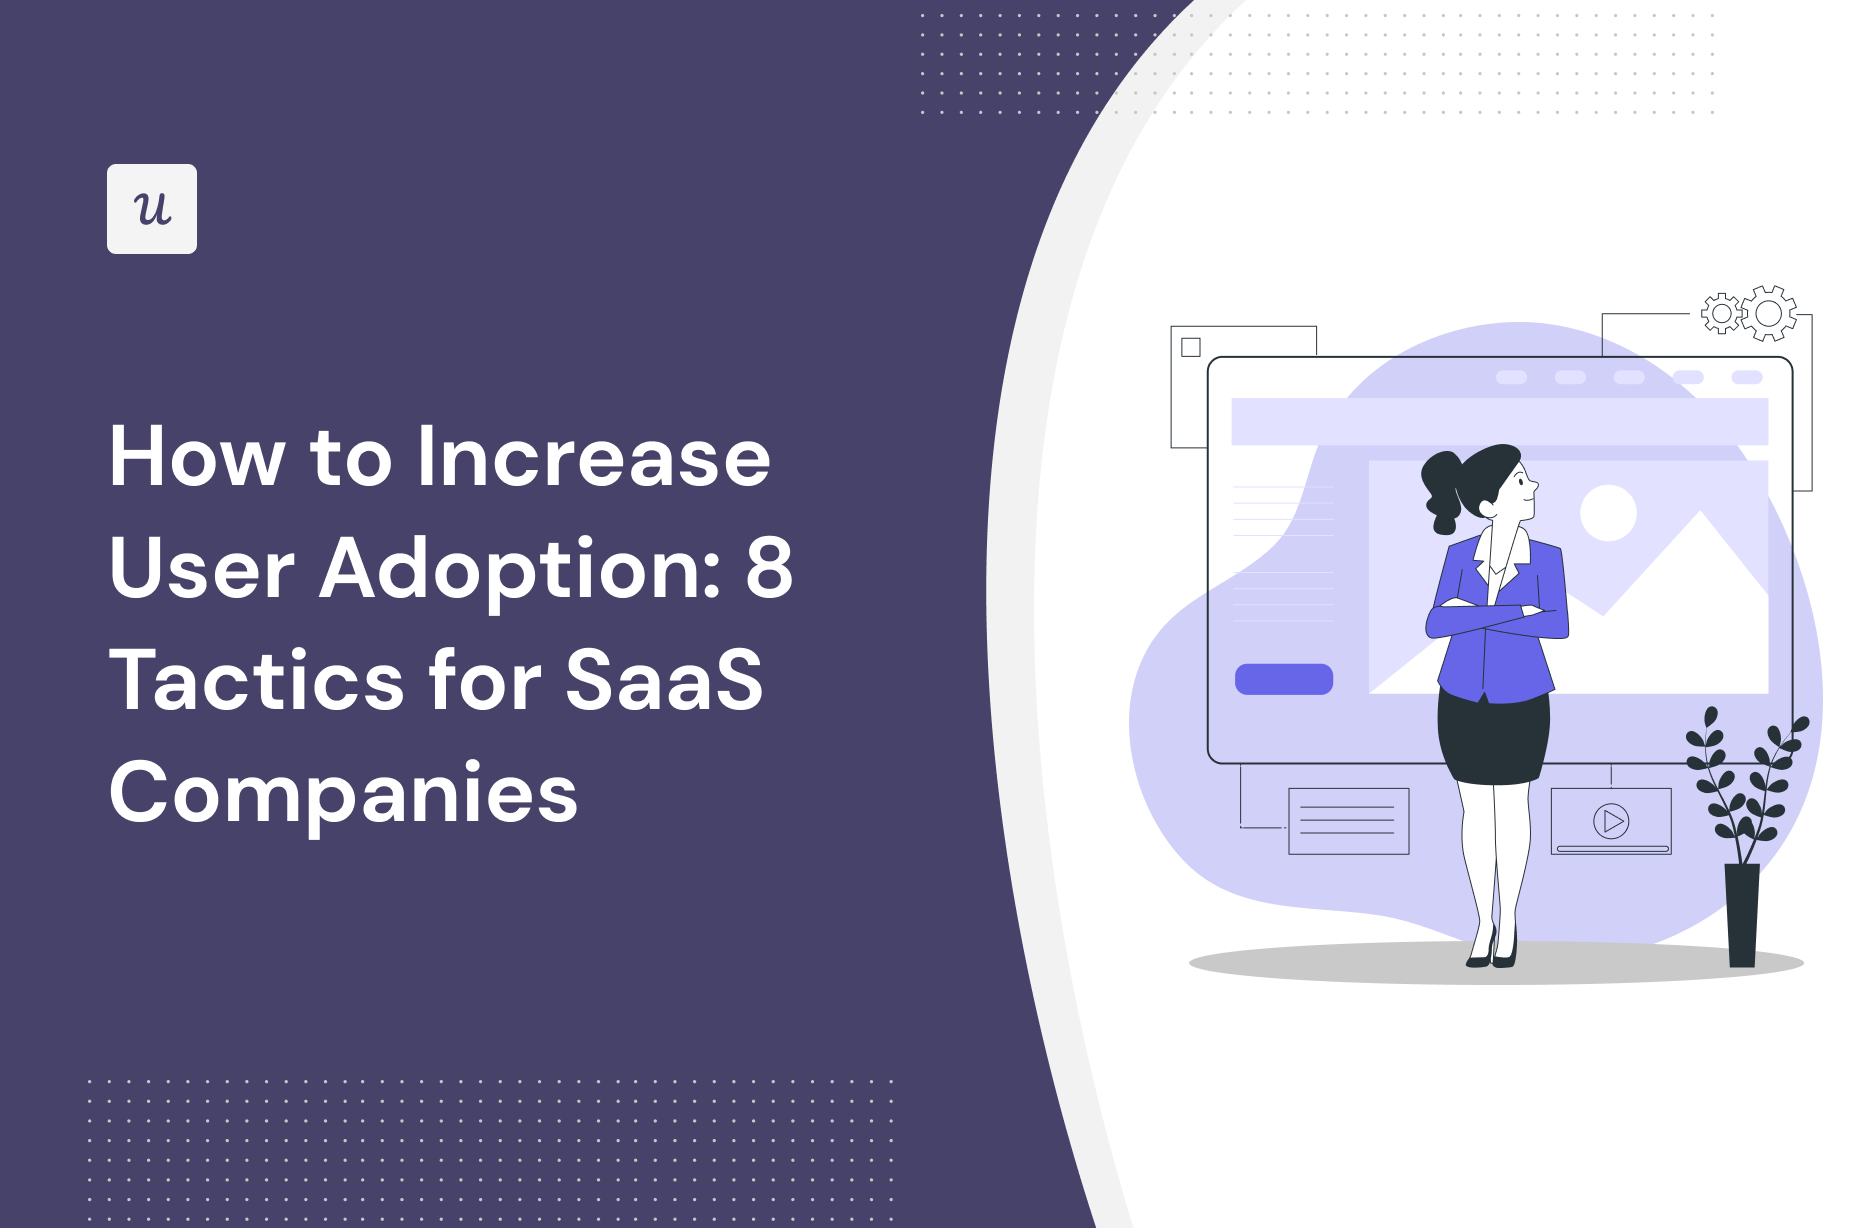 How to Increase User Adoption: 8 Tactics for SaaS Companies